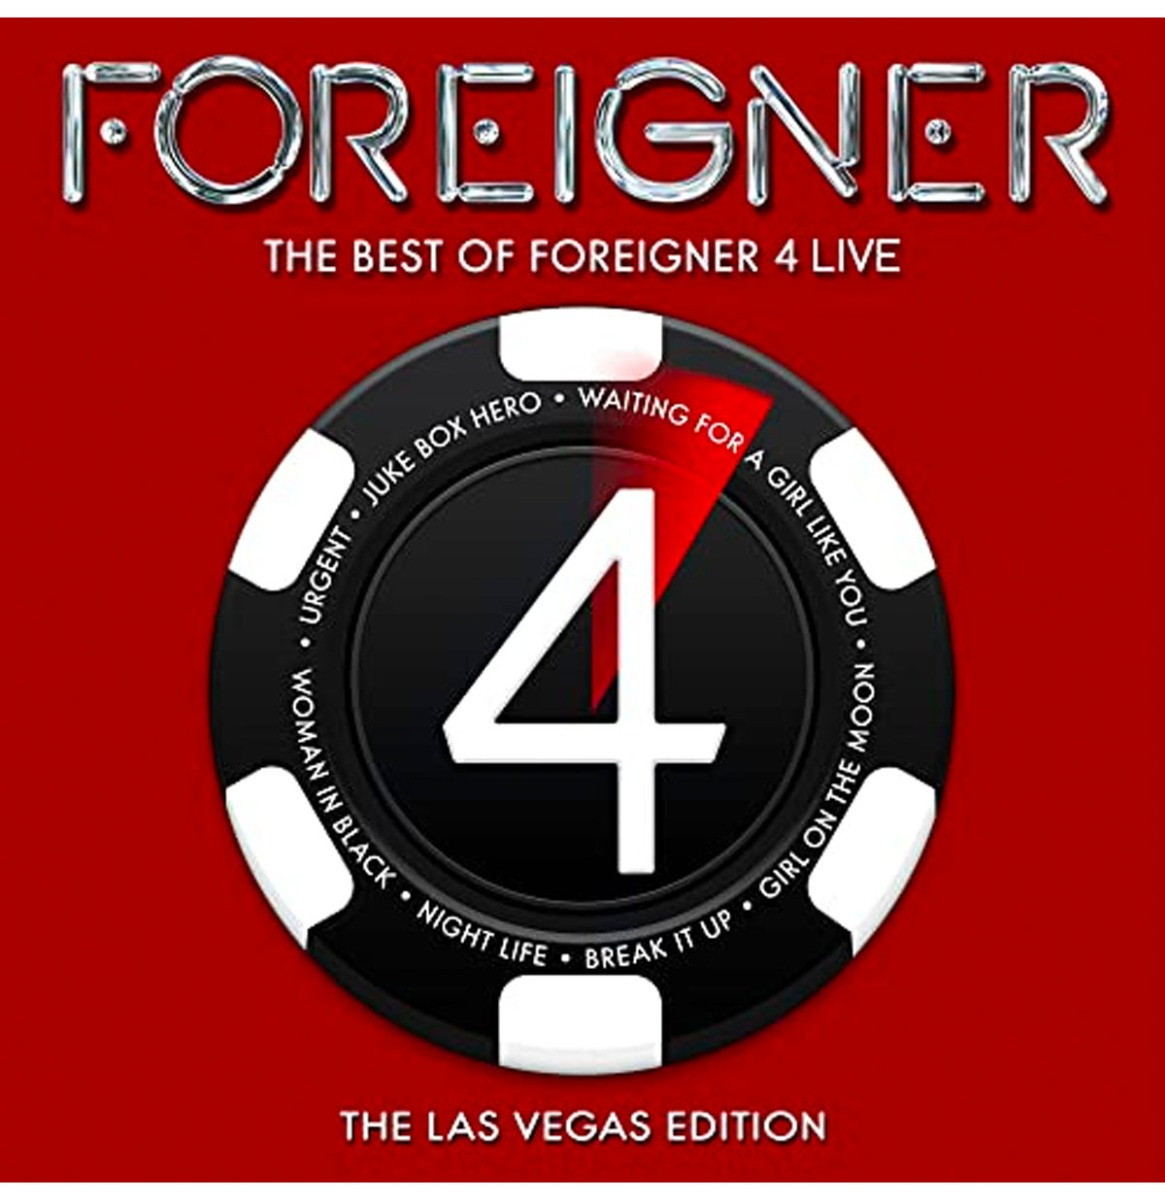 Foreigner - The Best Of Foreigner 4 Live (The Las Vegas Edition) (Limited Edition) LP